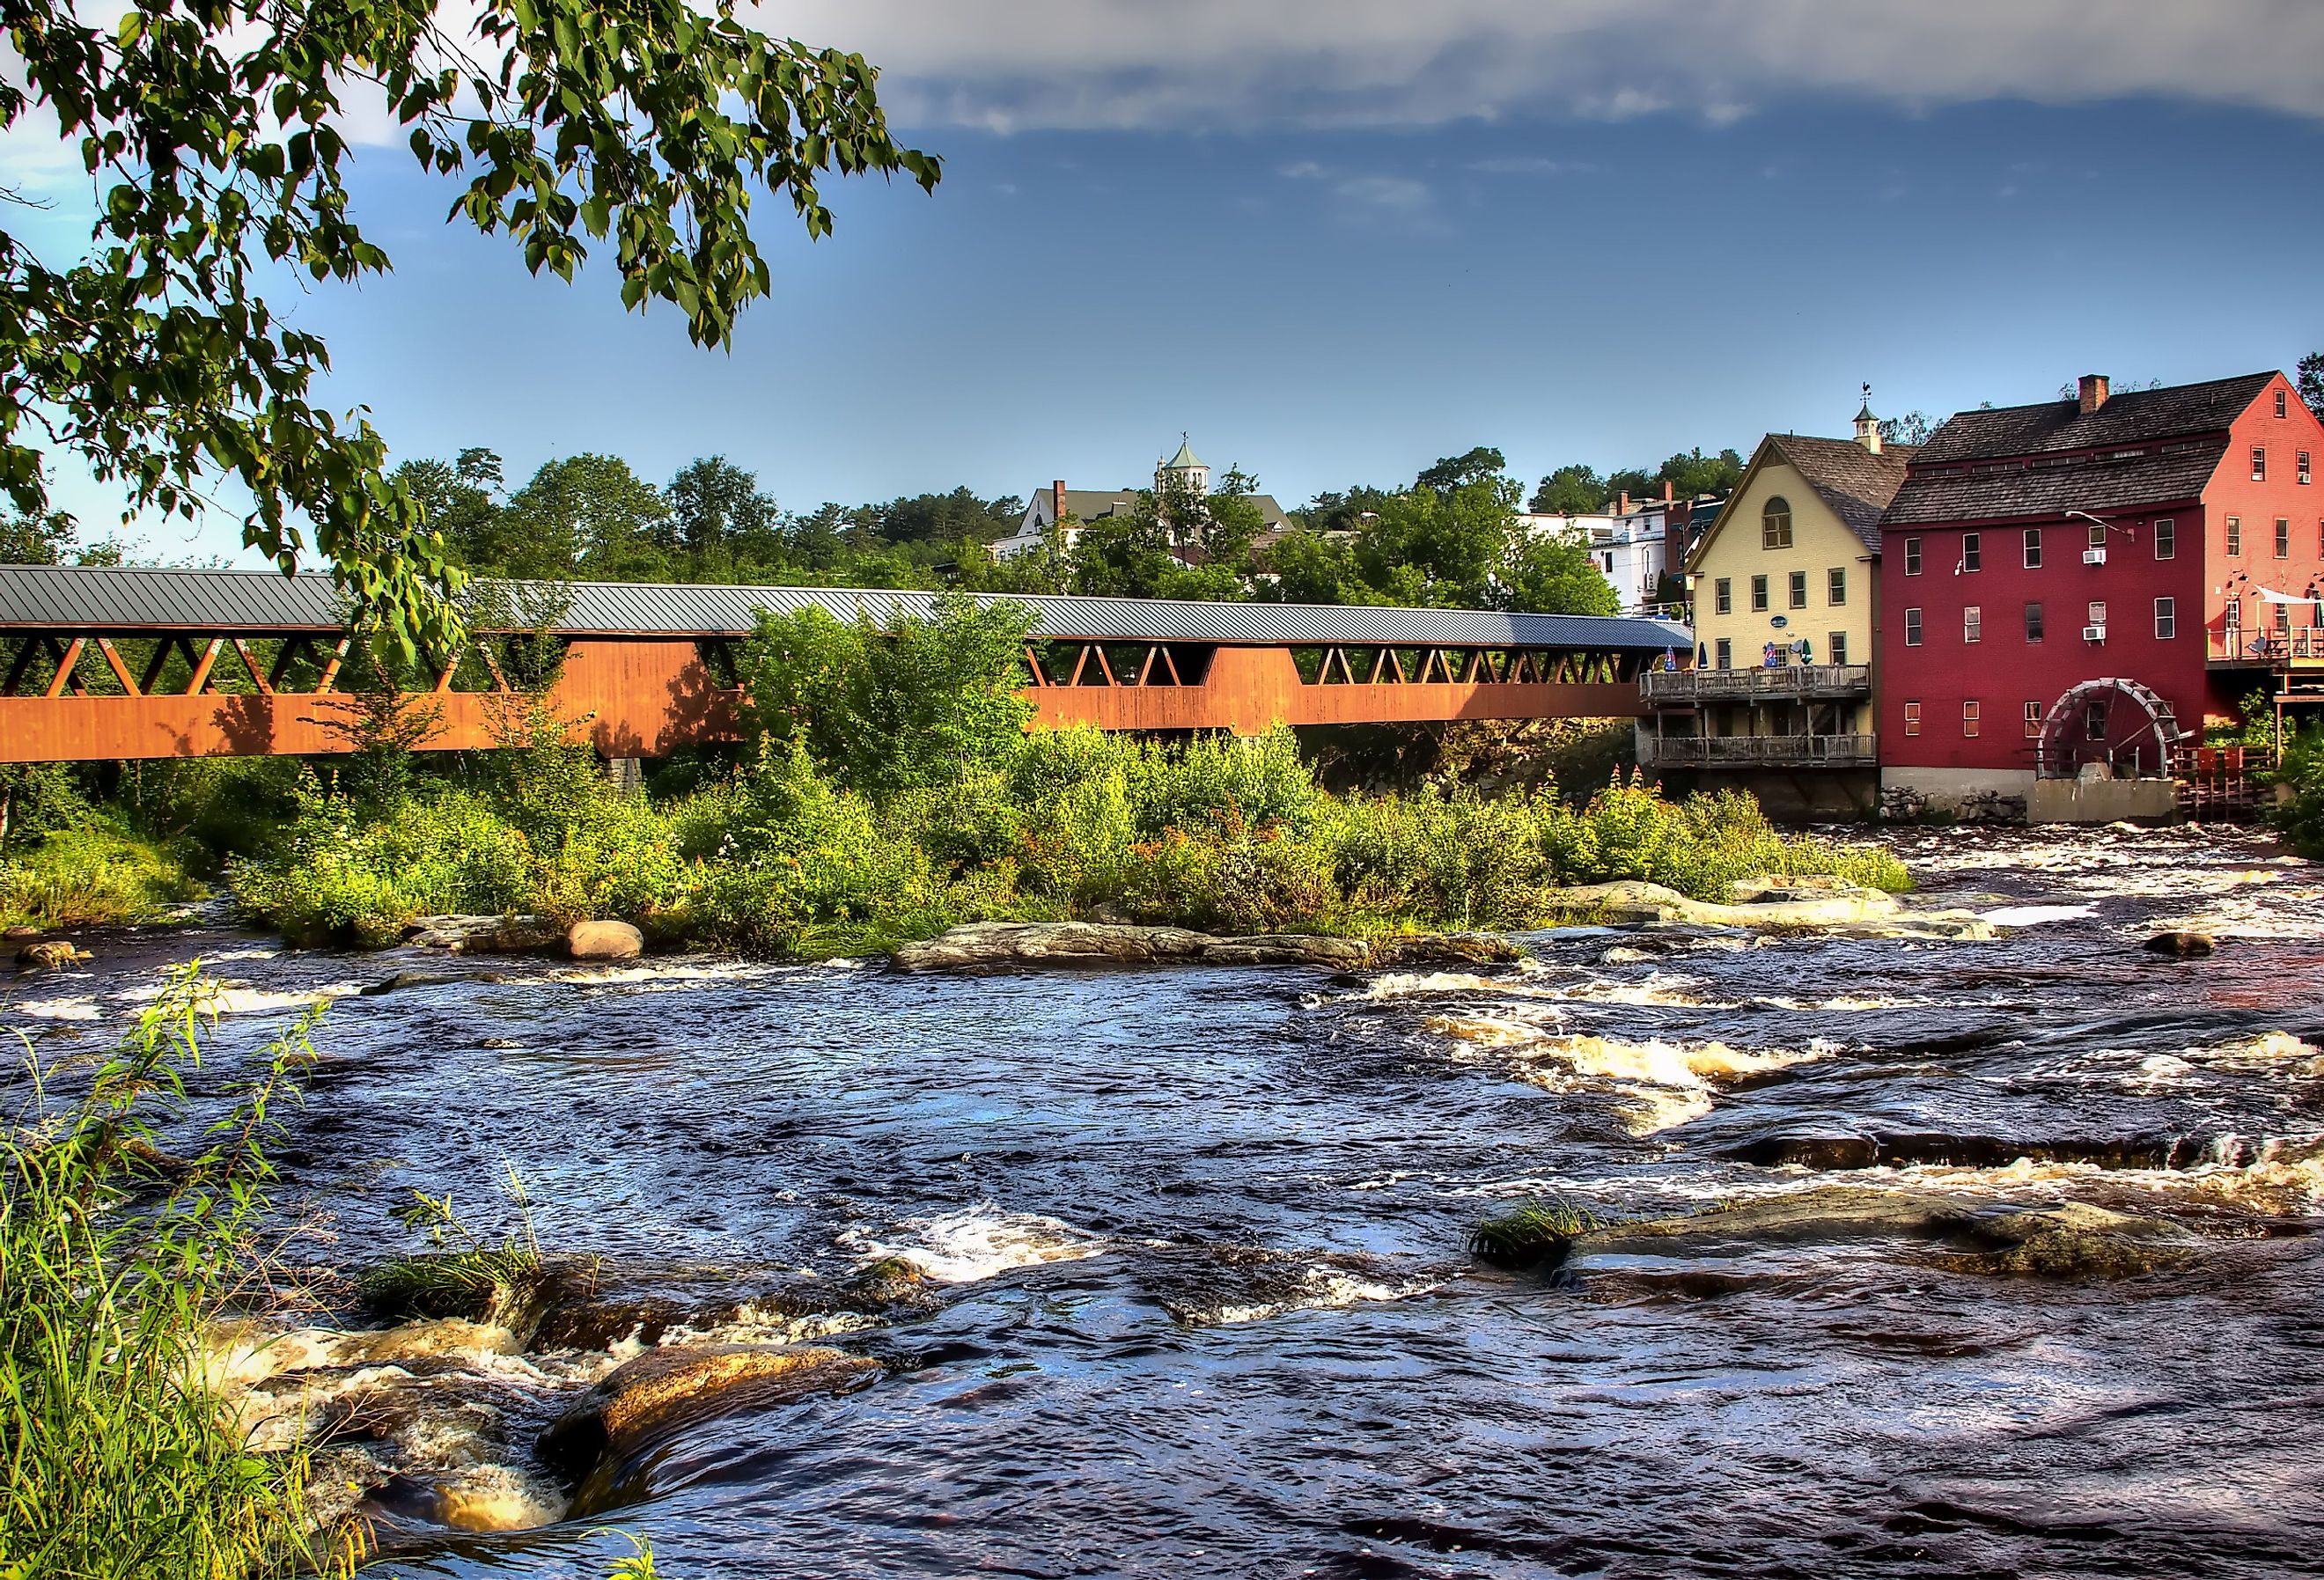 The River Walk Covered Bridge with the Grist mill on the Ammonoosuc River in Littleton, New Hampshire.